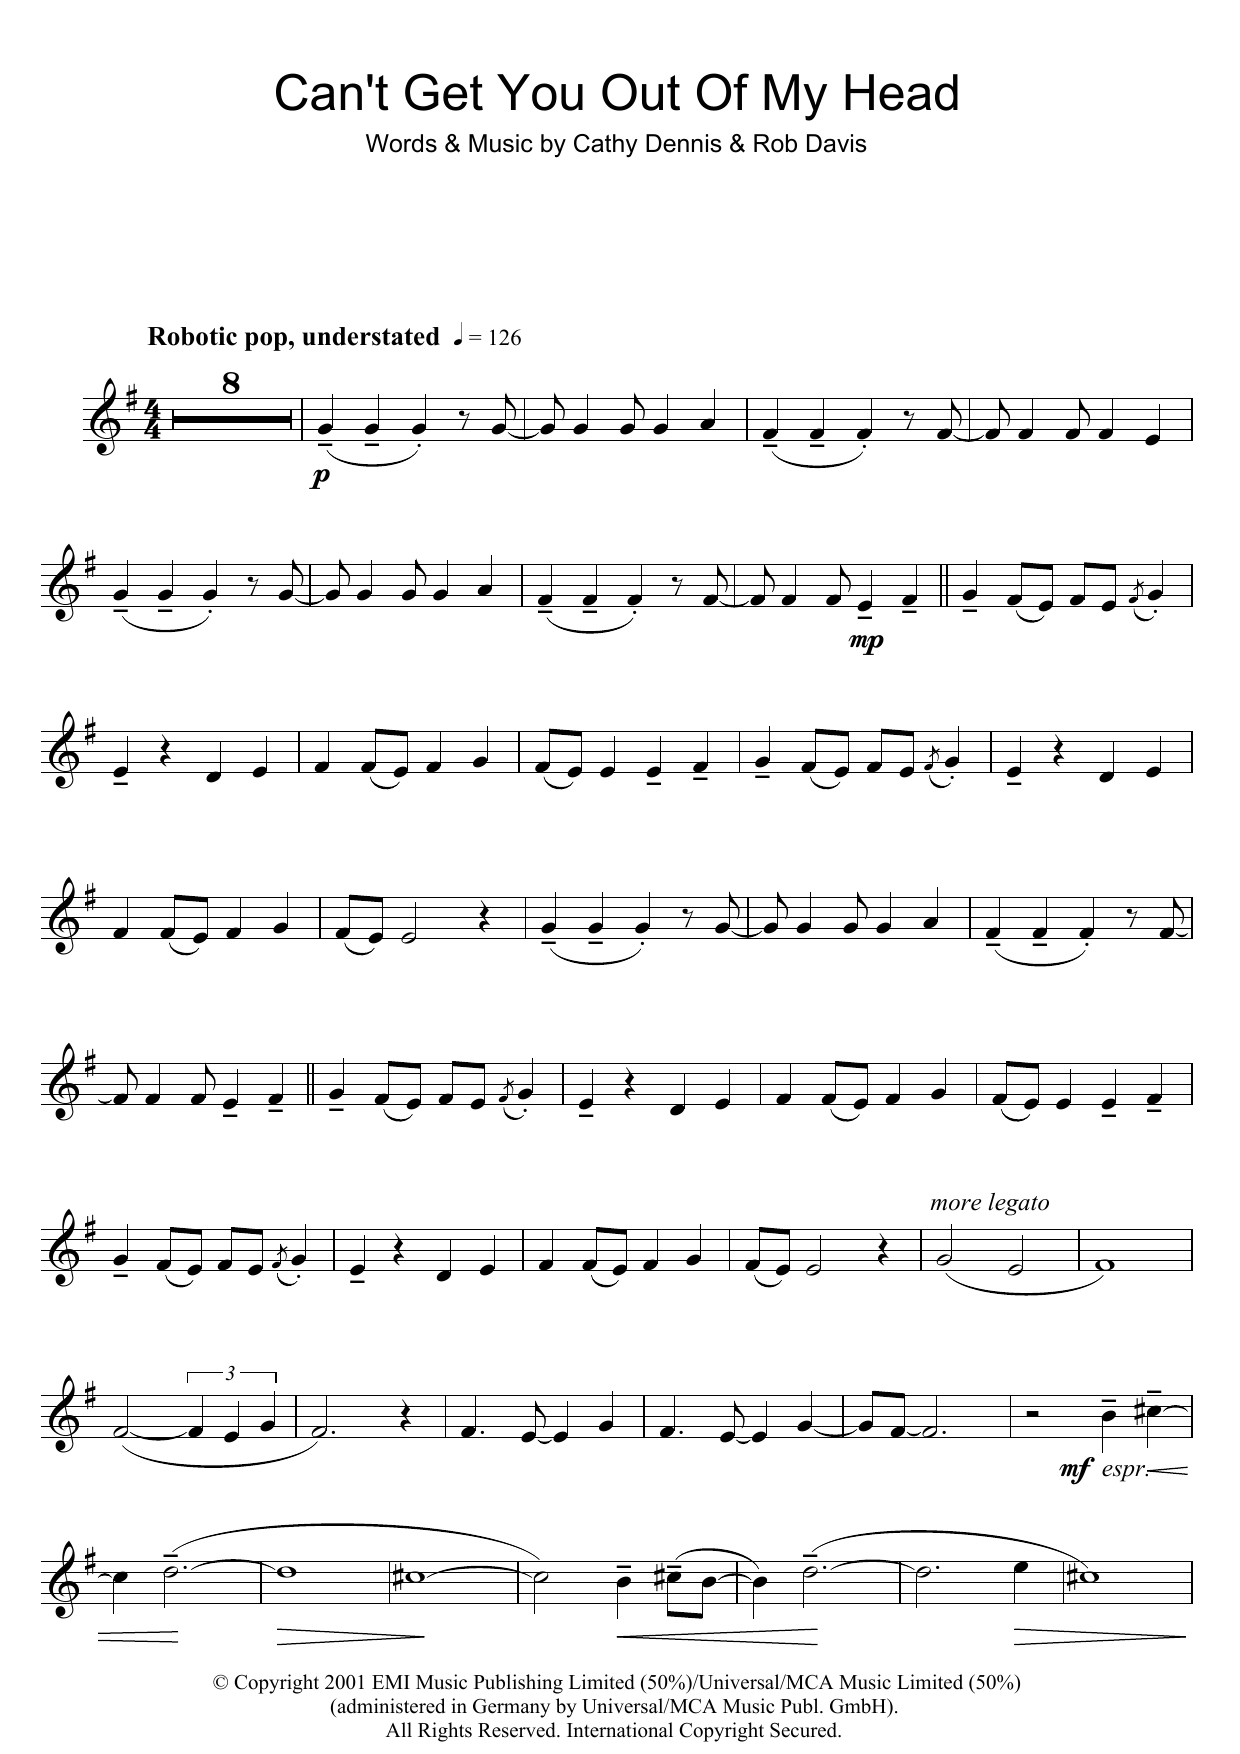 Download Kylie Minogue Can't Get You Out Of My Head Sheet Music